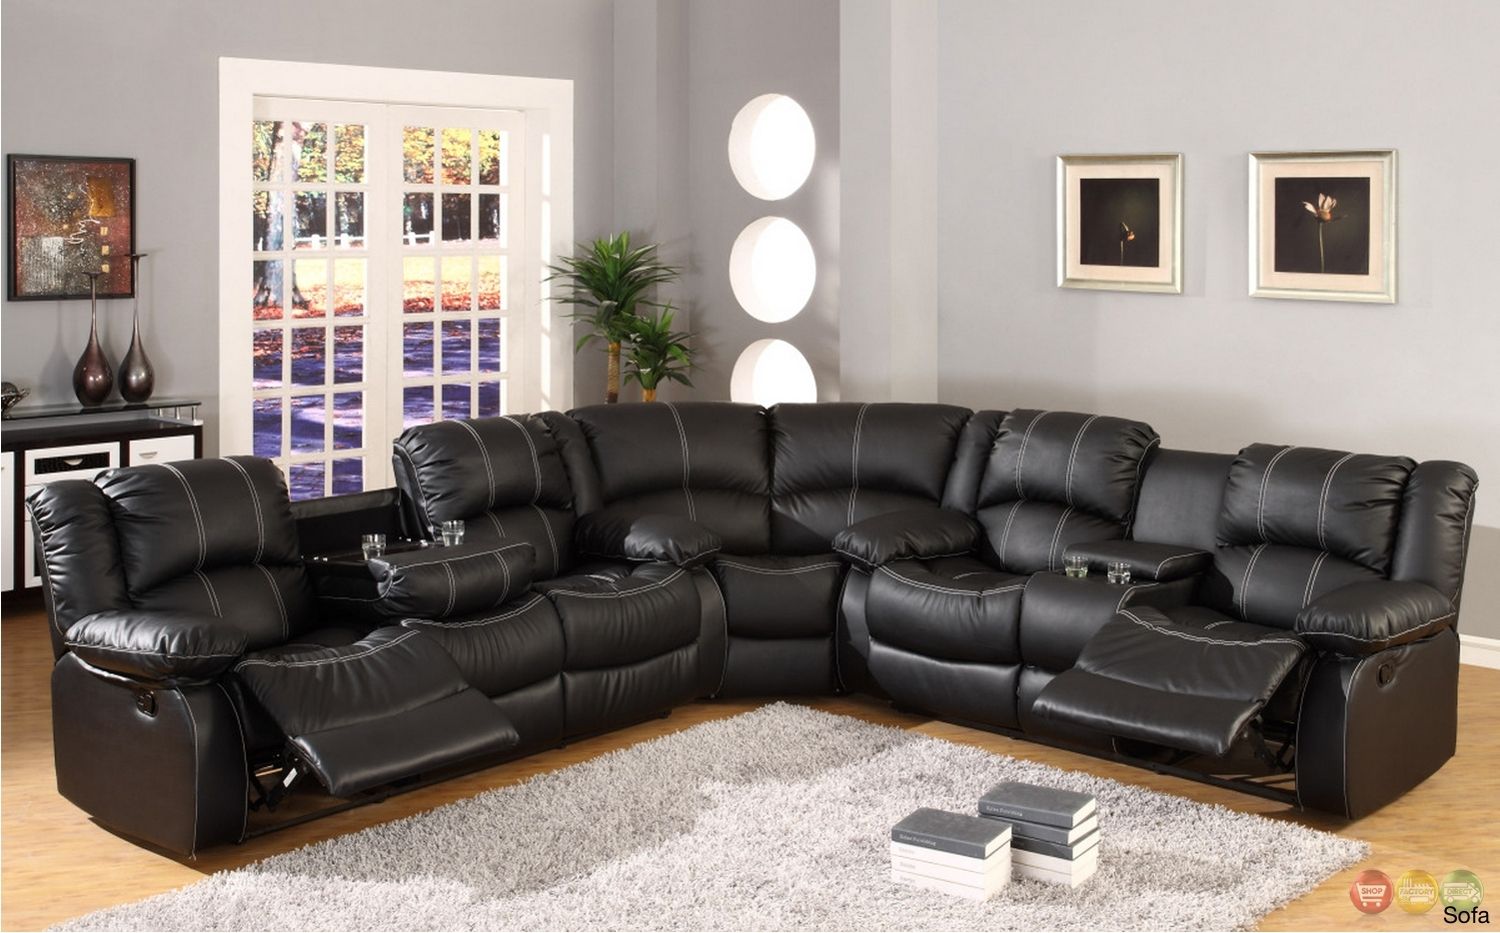 Astonishing Leather Motion Sectional Sofa 24 For Your Media Room Intended For Leather Motion Sectional Sofas (Photo 4 of 10)